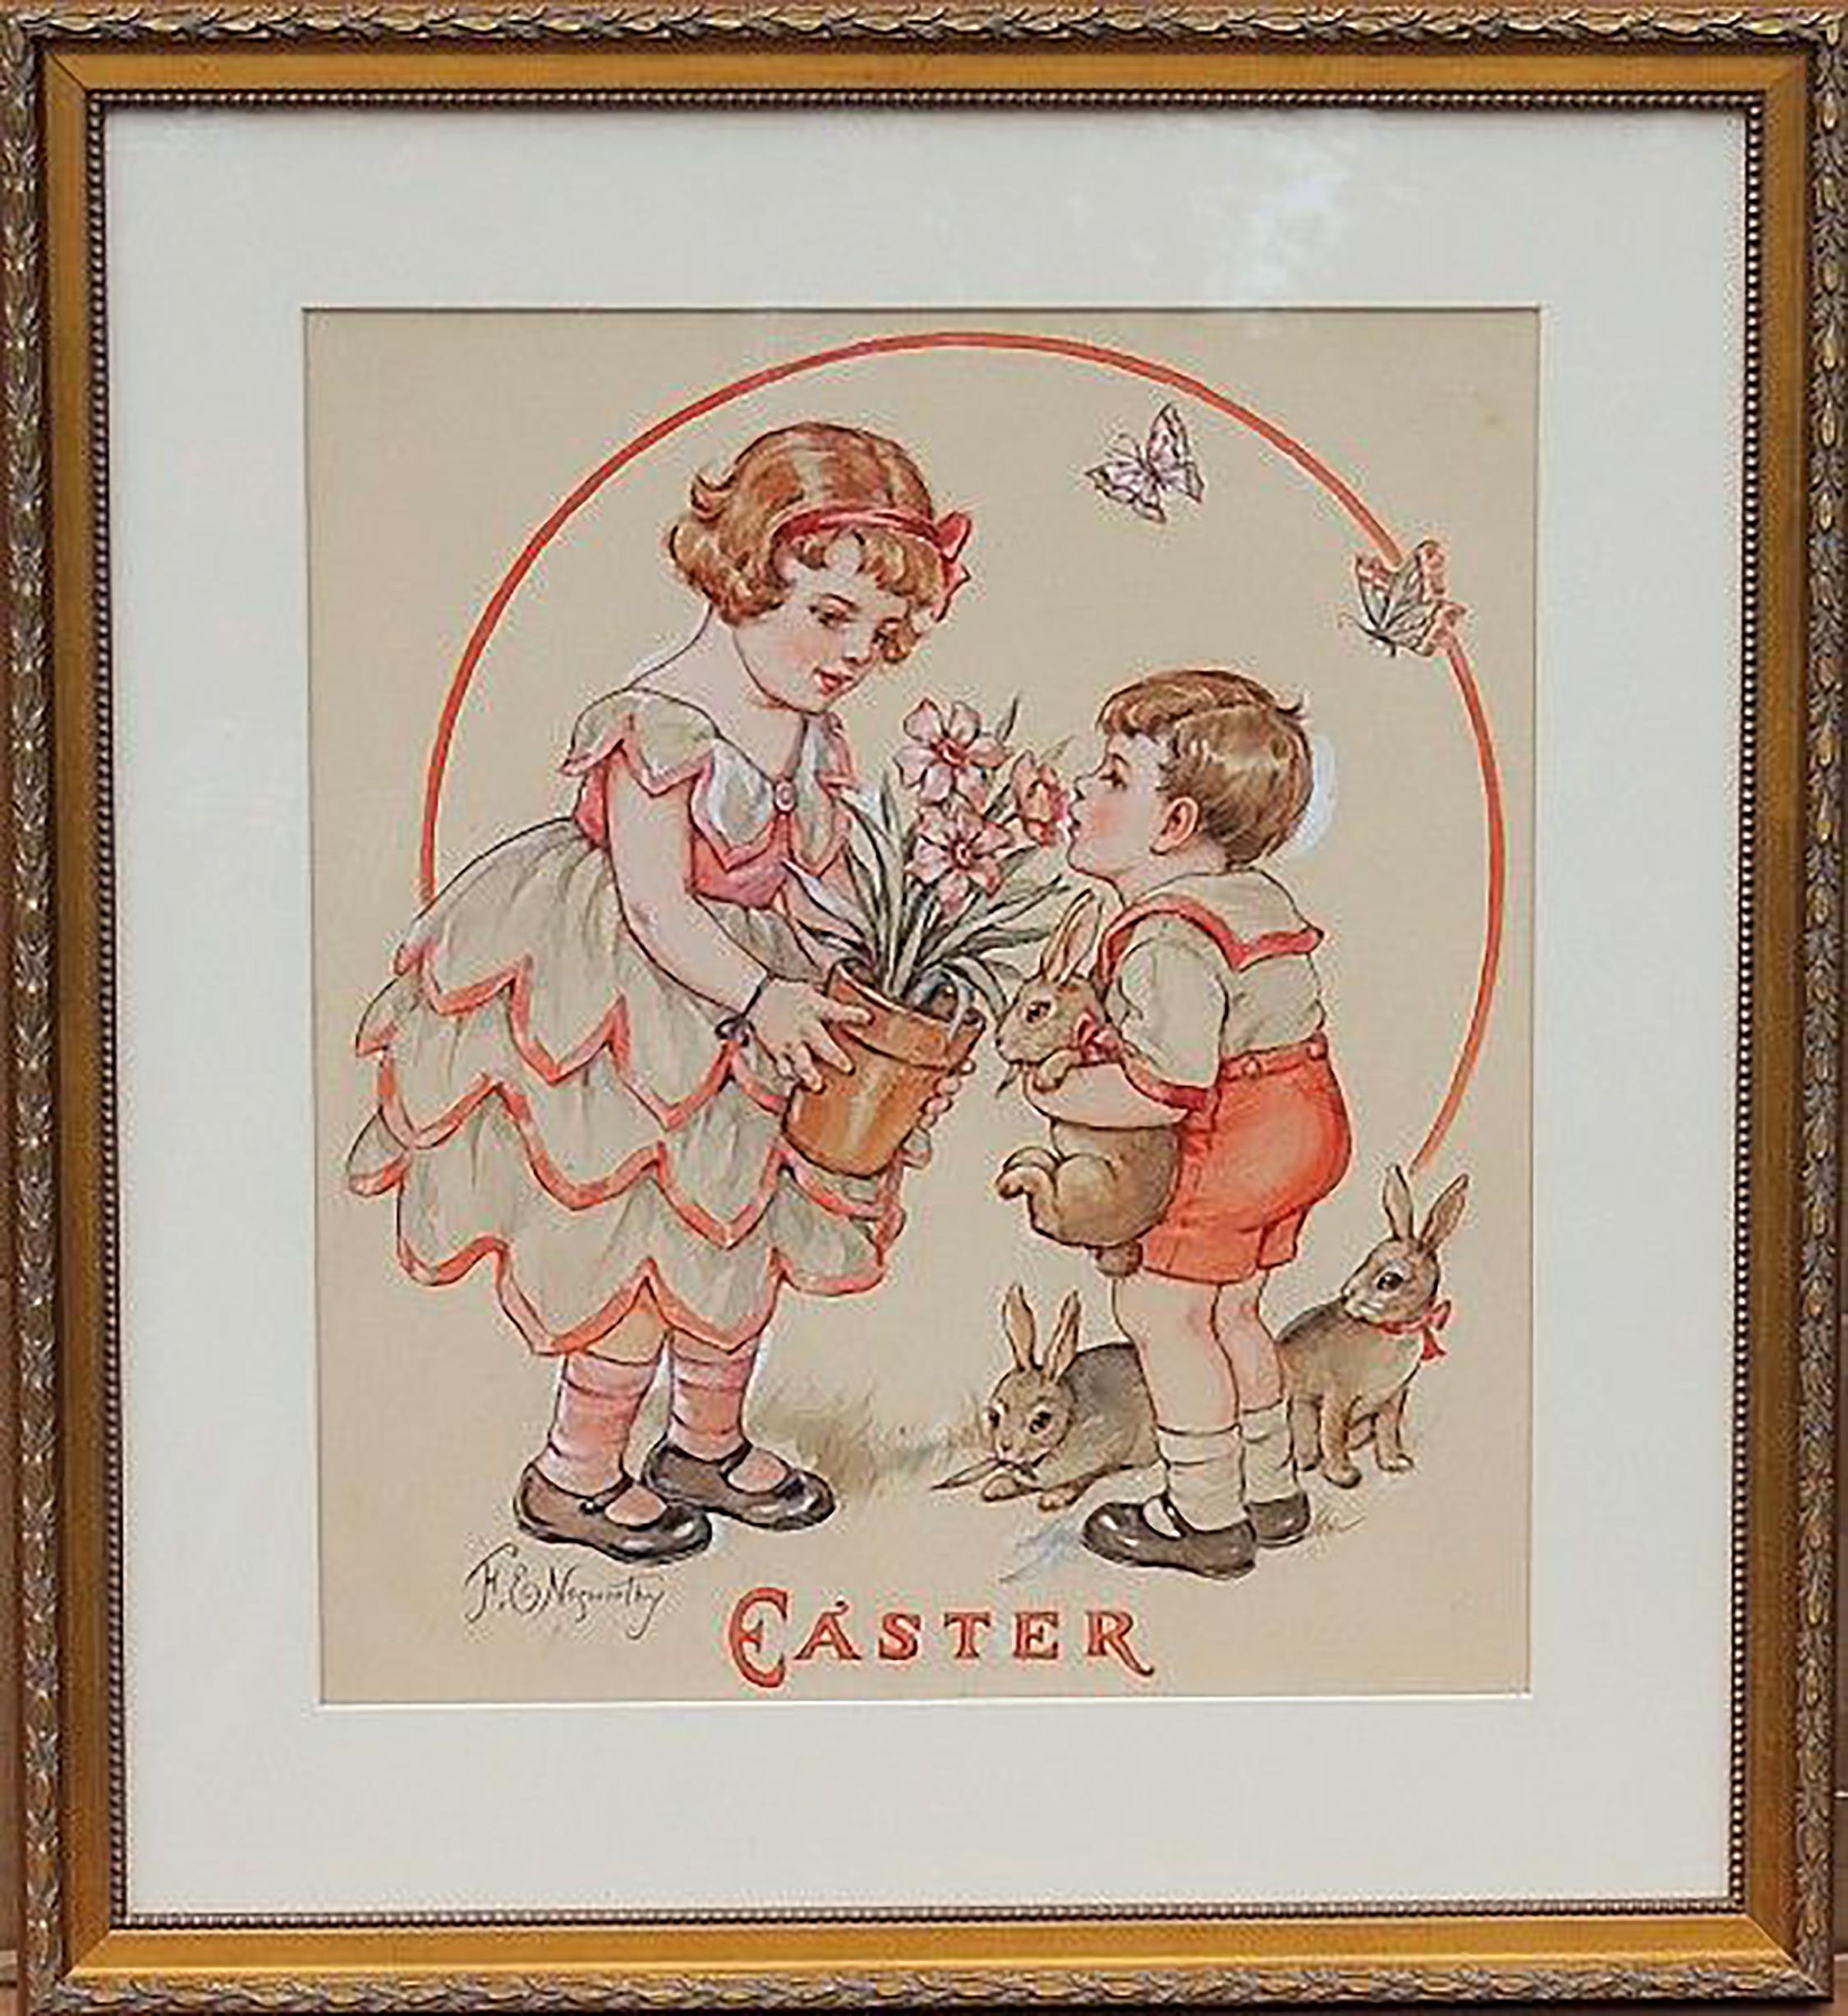 Easter Illustration - Art by Florence E. Nosworthy